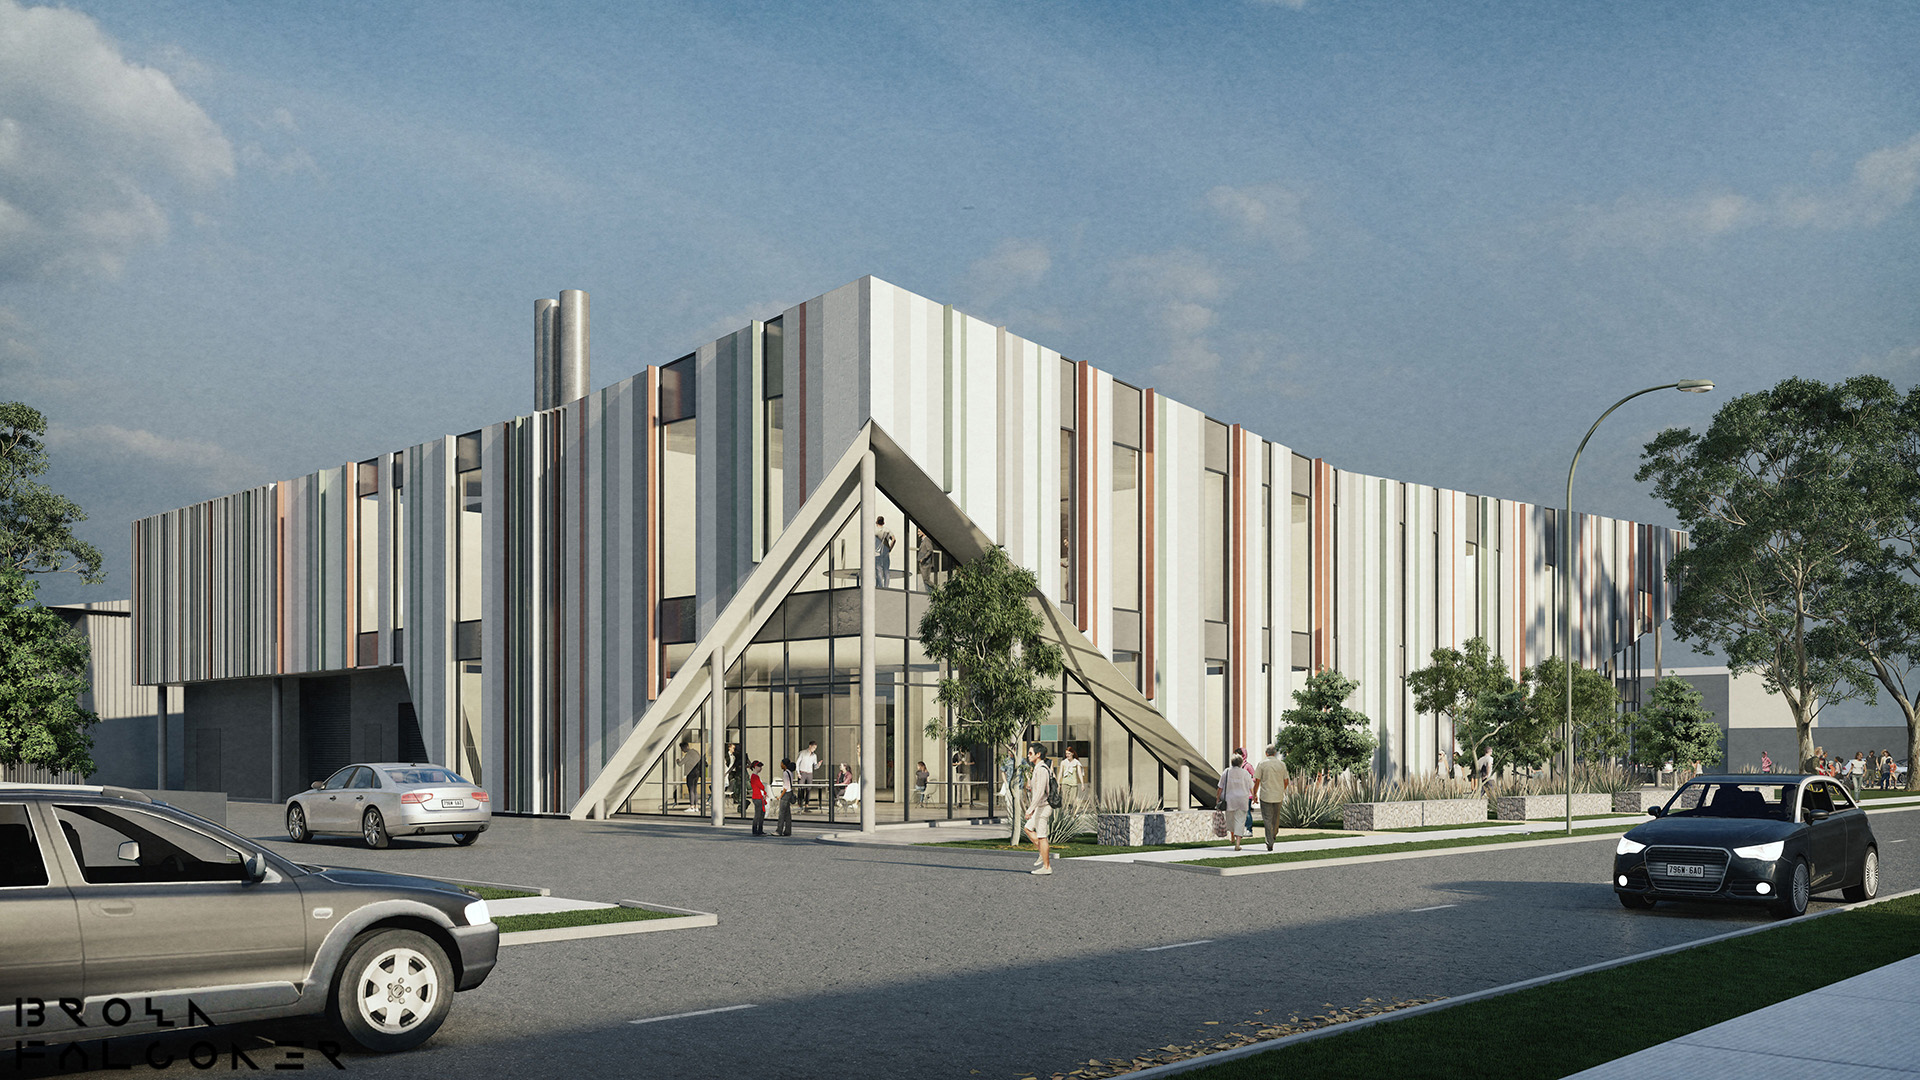 A concept image of Findon Technical College. The college is surrounded on multiple sides by roads providing easy access.